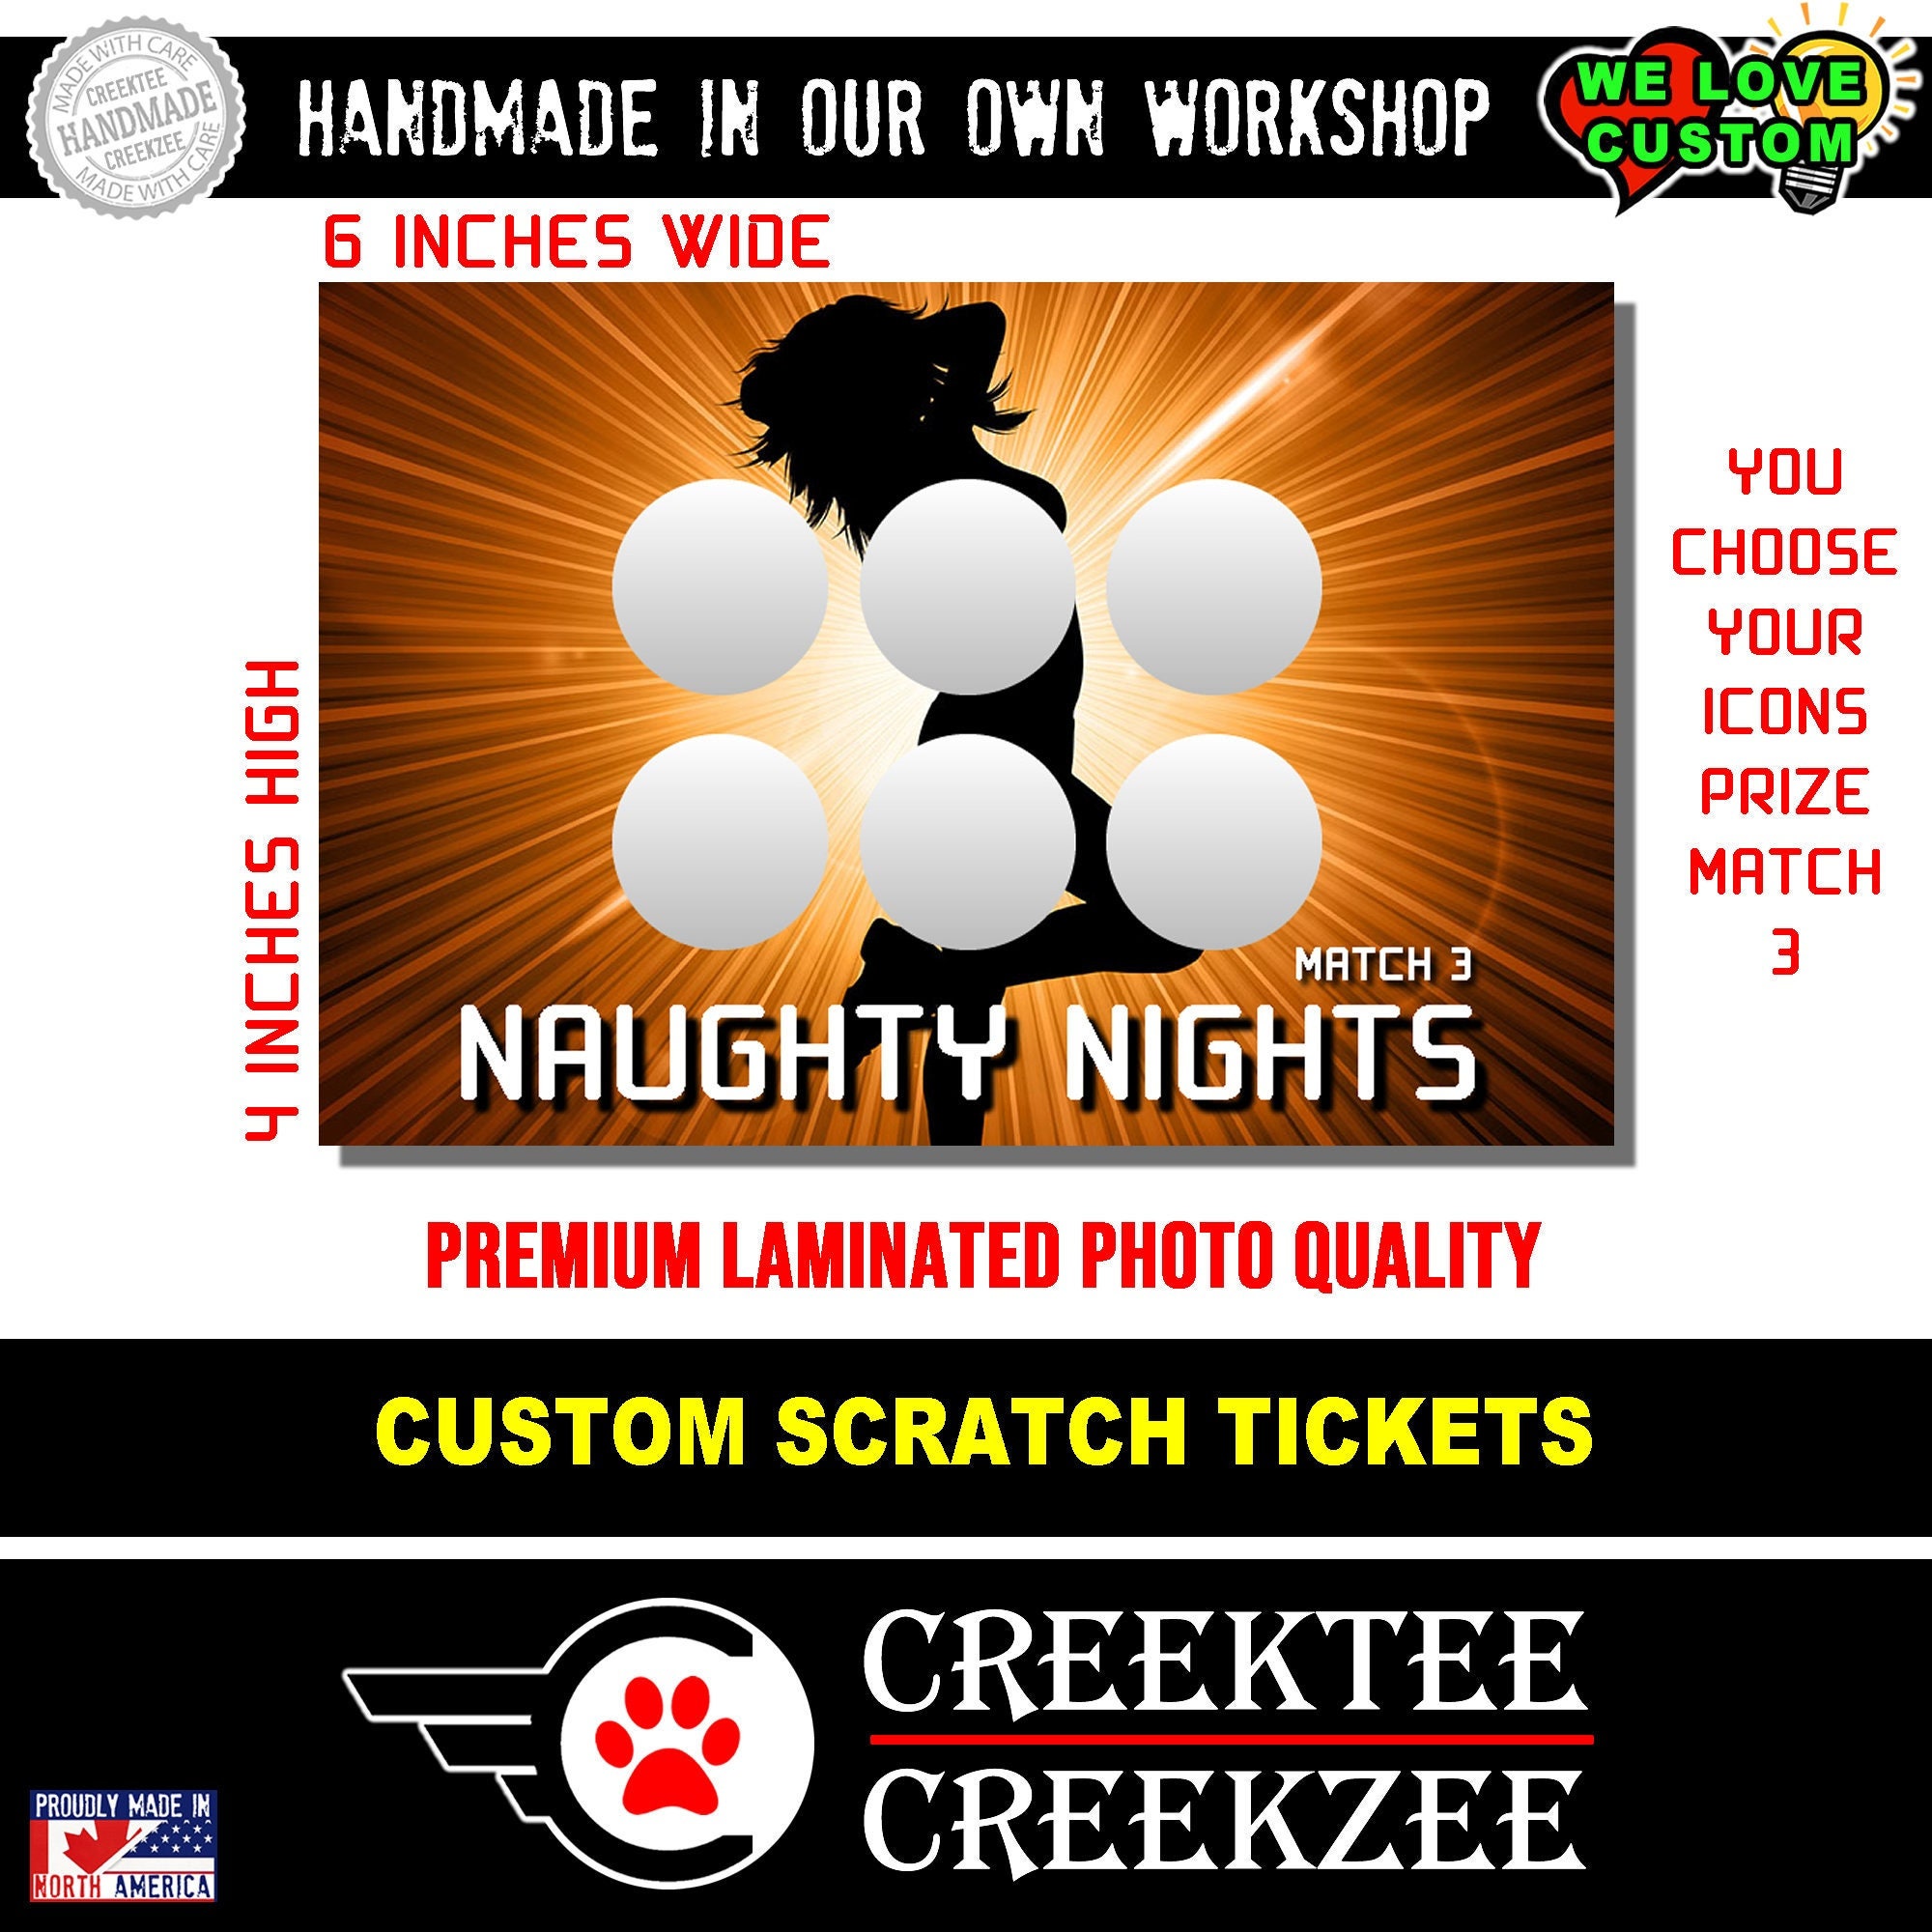 Naughty Nights Match 3 Adult Scratch Faux Lottery Ticket Simulation Scratch Tickets 6